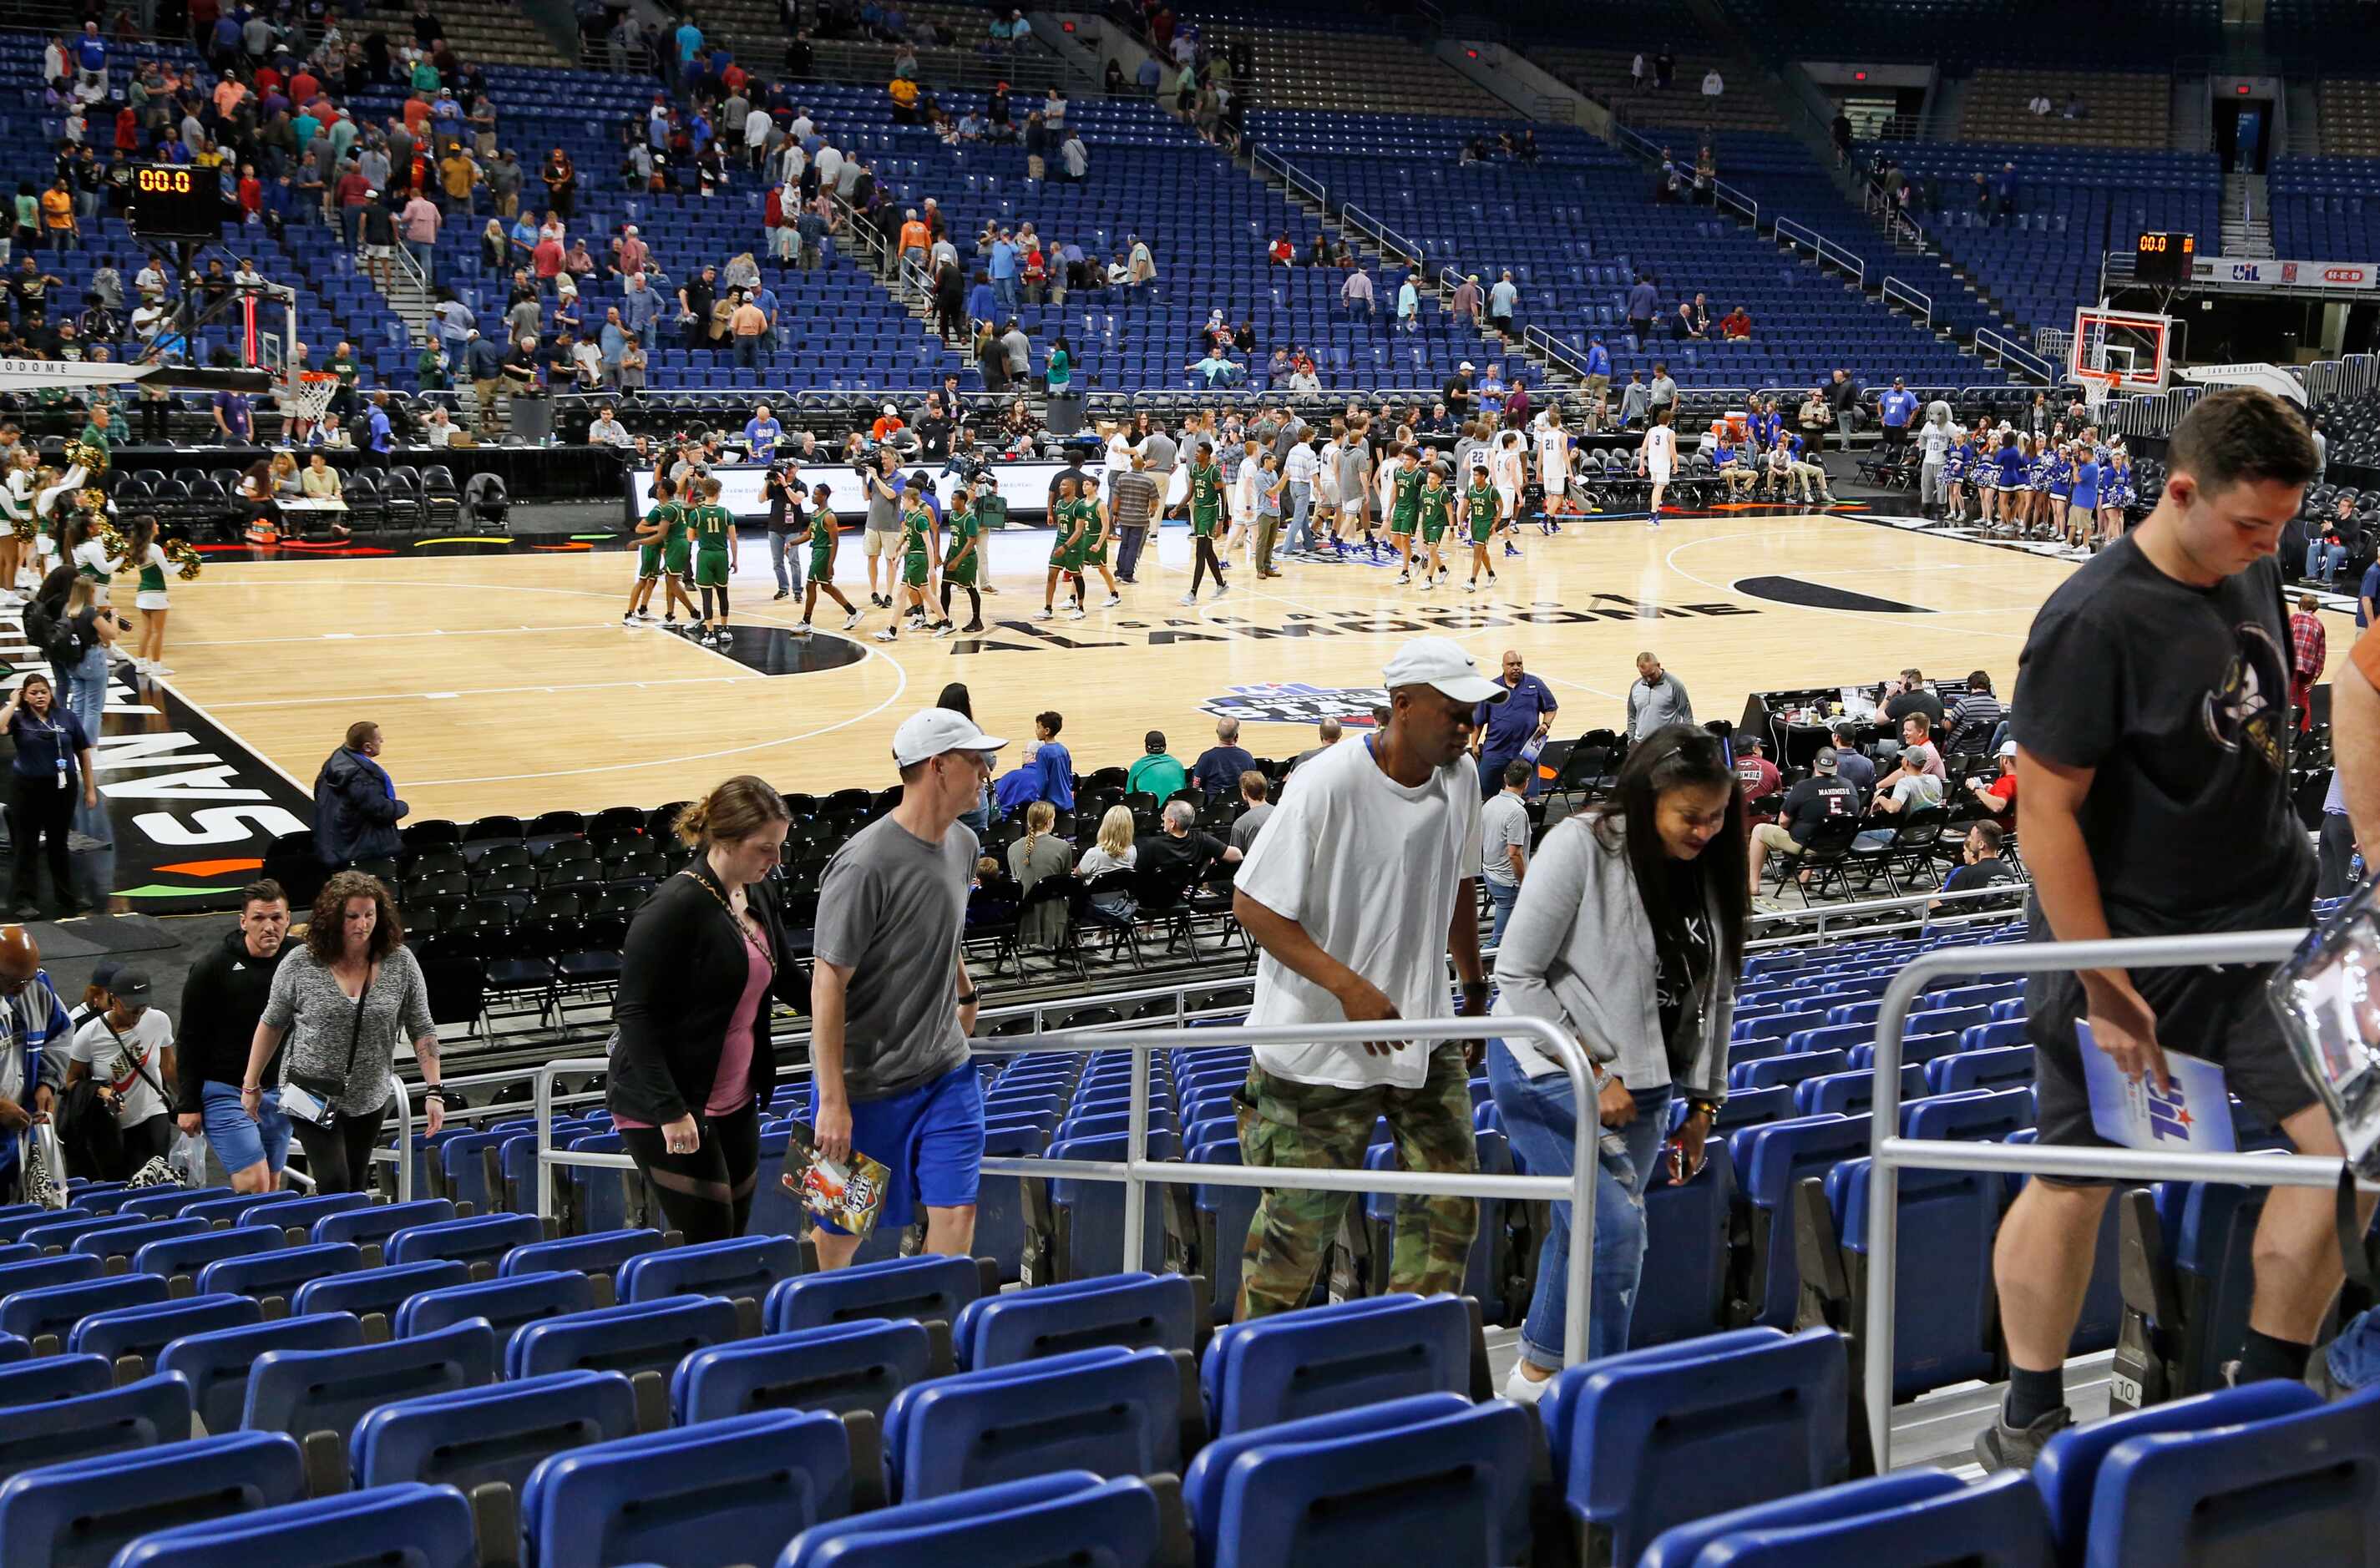 At the conclusion of the Final 3A game, fans depart as the rest of thee tournament was...